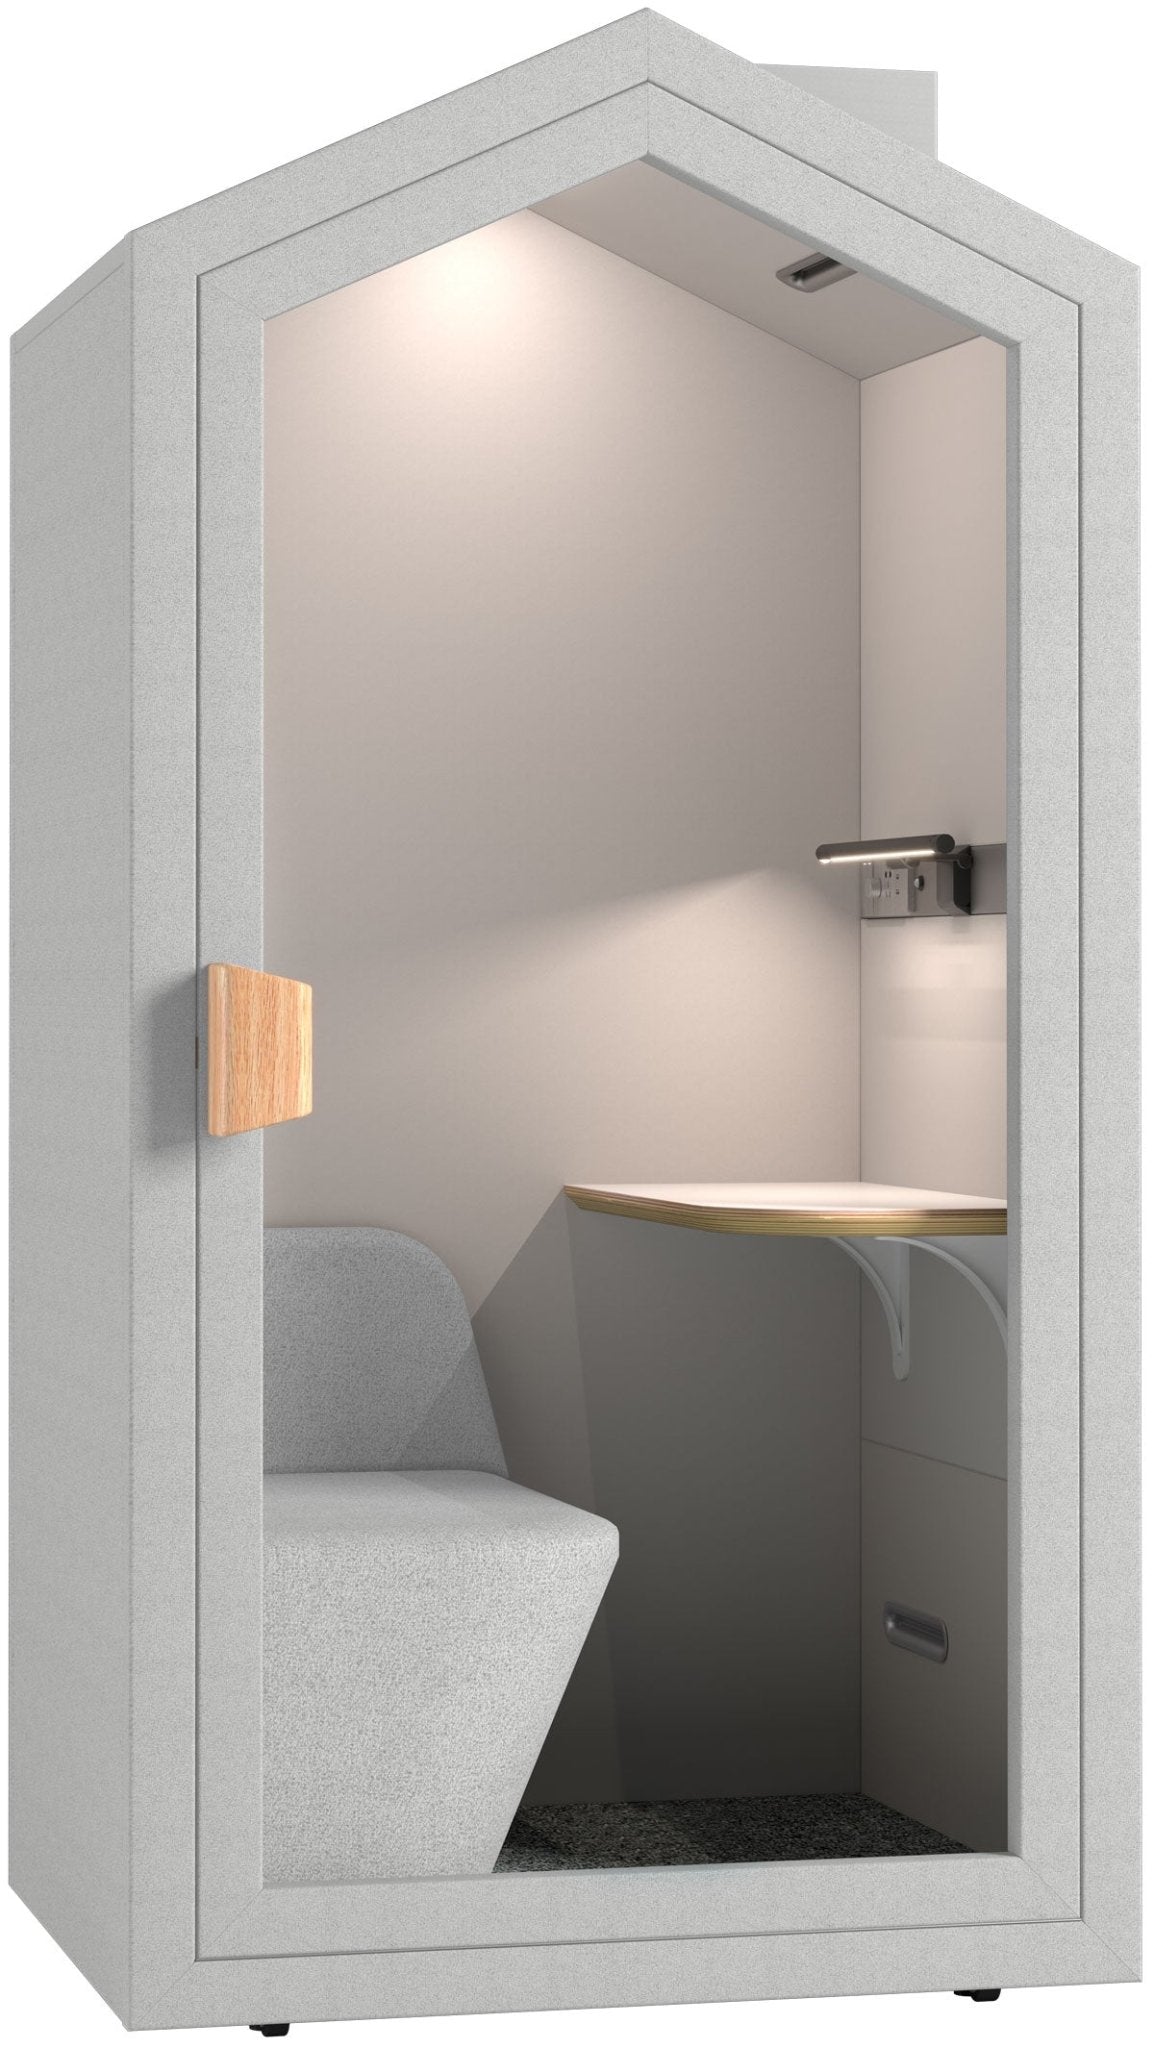 Home office pod in light gray color